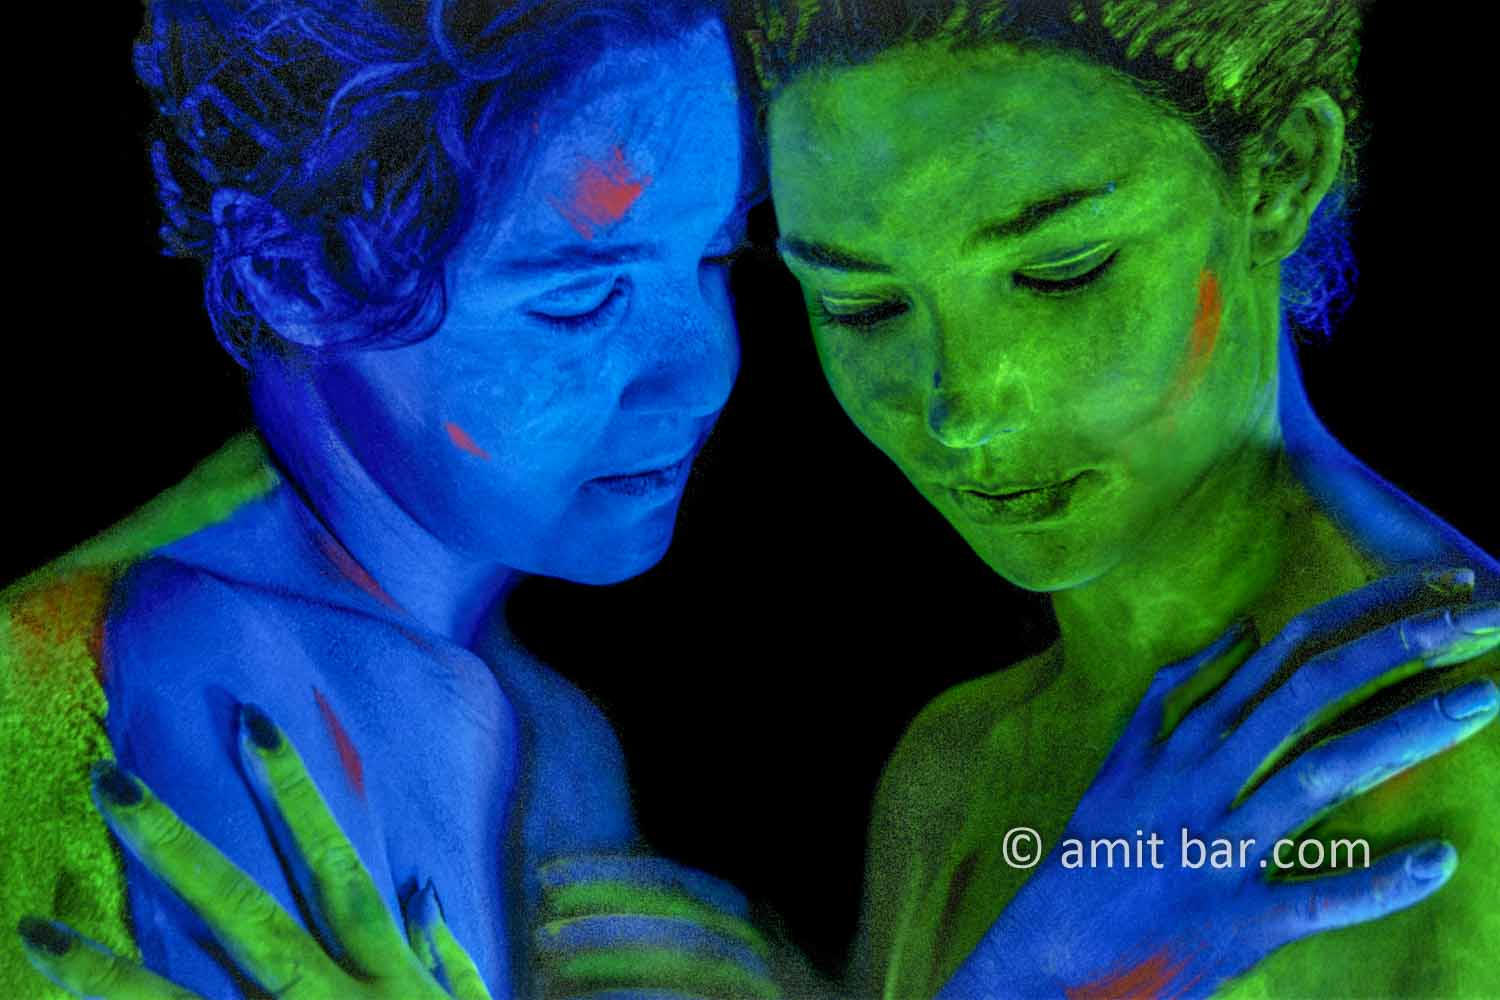 Blue and green II: Two body-painted models in UV blue and green